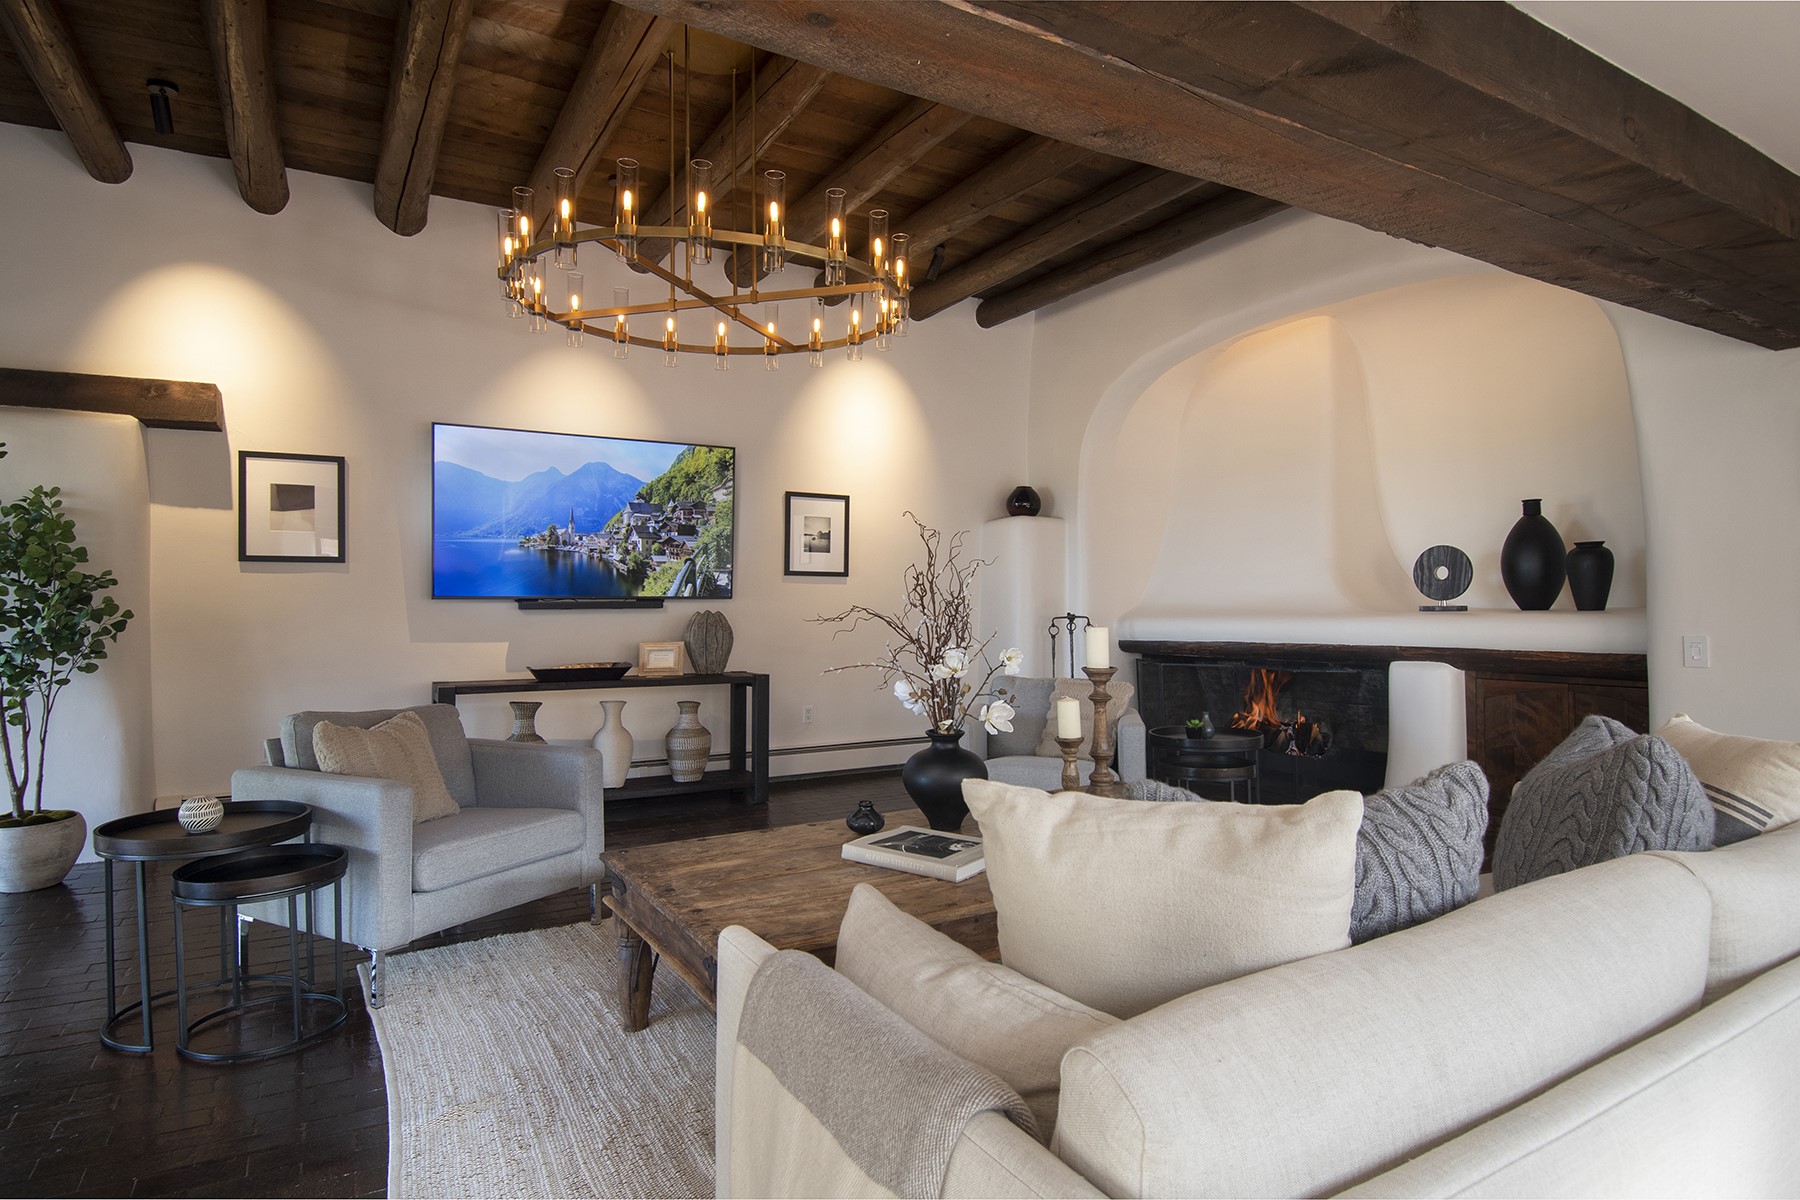 Living Room with vigas, brick floors and stunning architectural designed fireplace.
